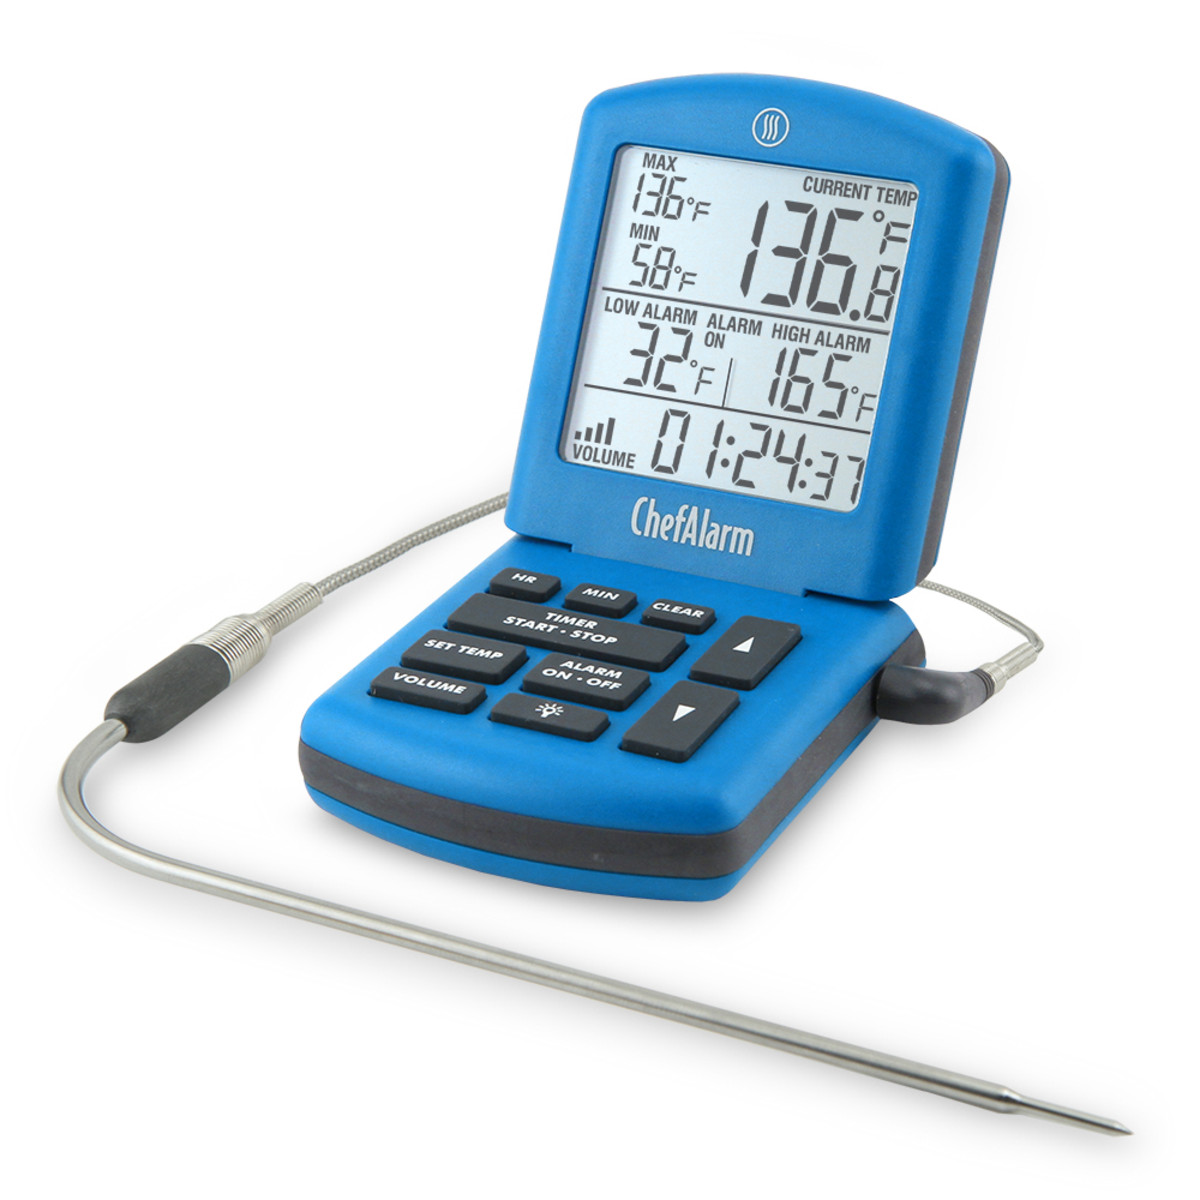 THERMOWORKS/THERMAPEN ONE DIGITAL THERMOMETER, Cooks' Emporium